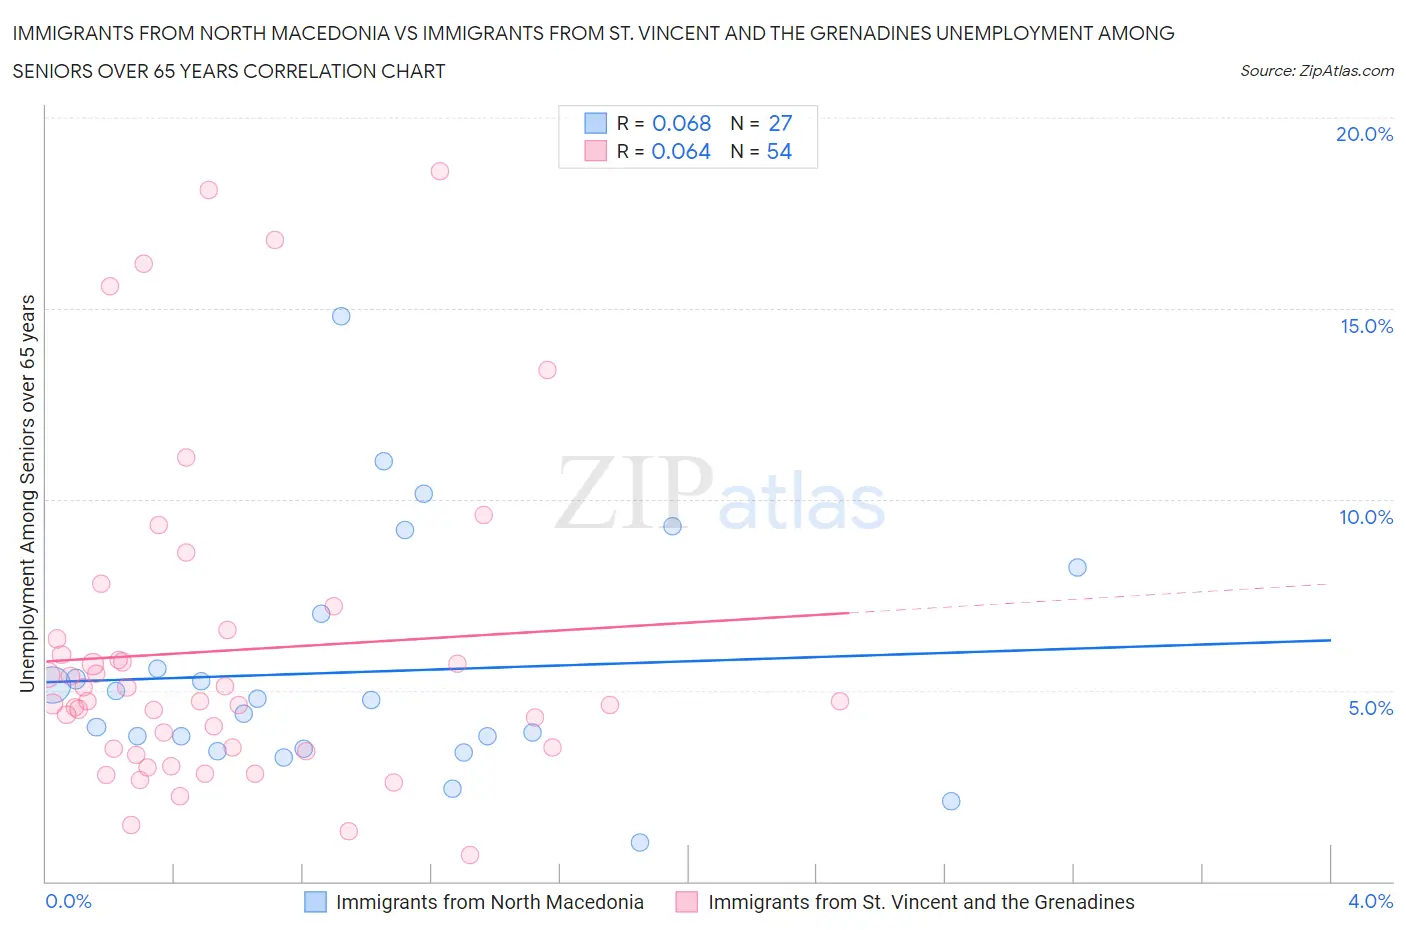 Immigrants from North Macedonia vs Immigrants from St. Vincent and the Grenadines Unemployment Among Seniors over 65 years